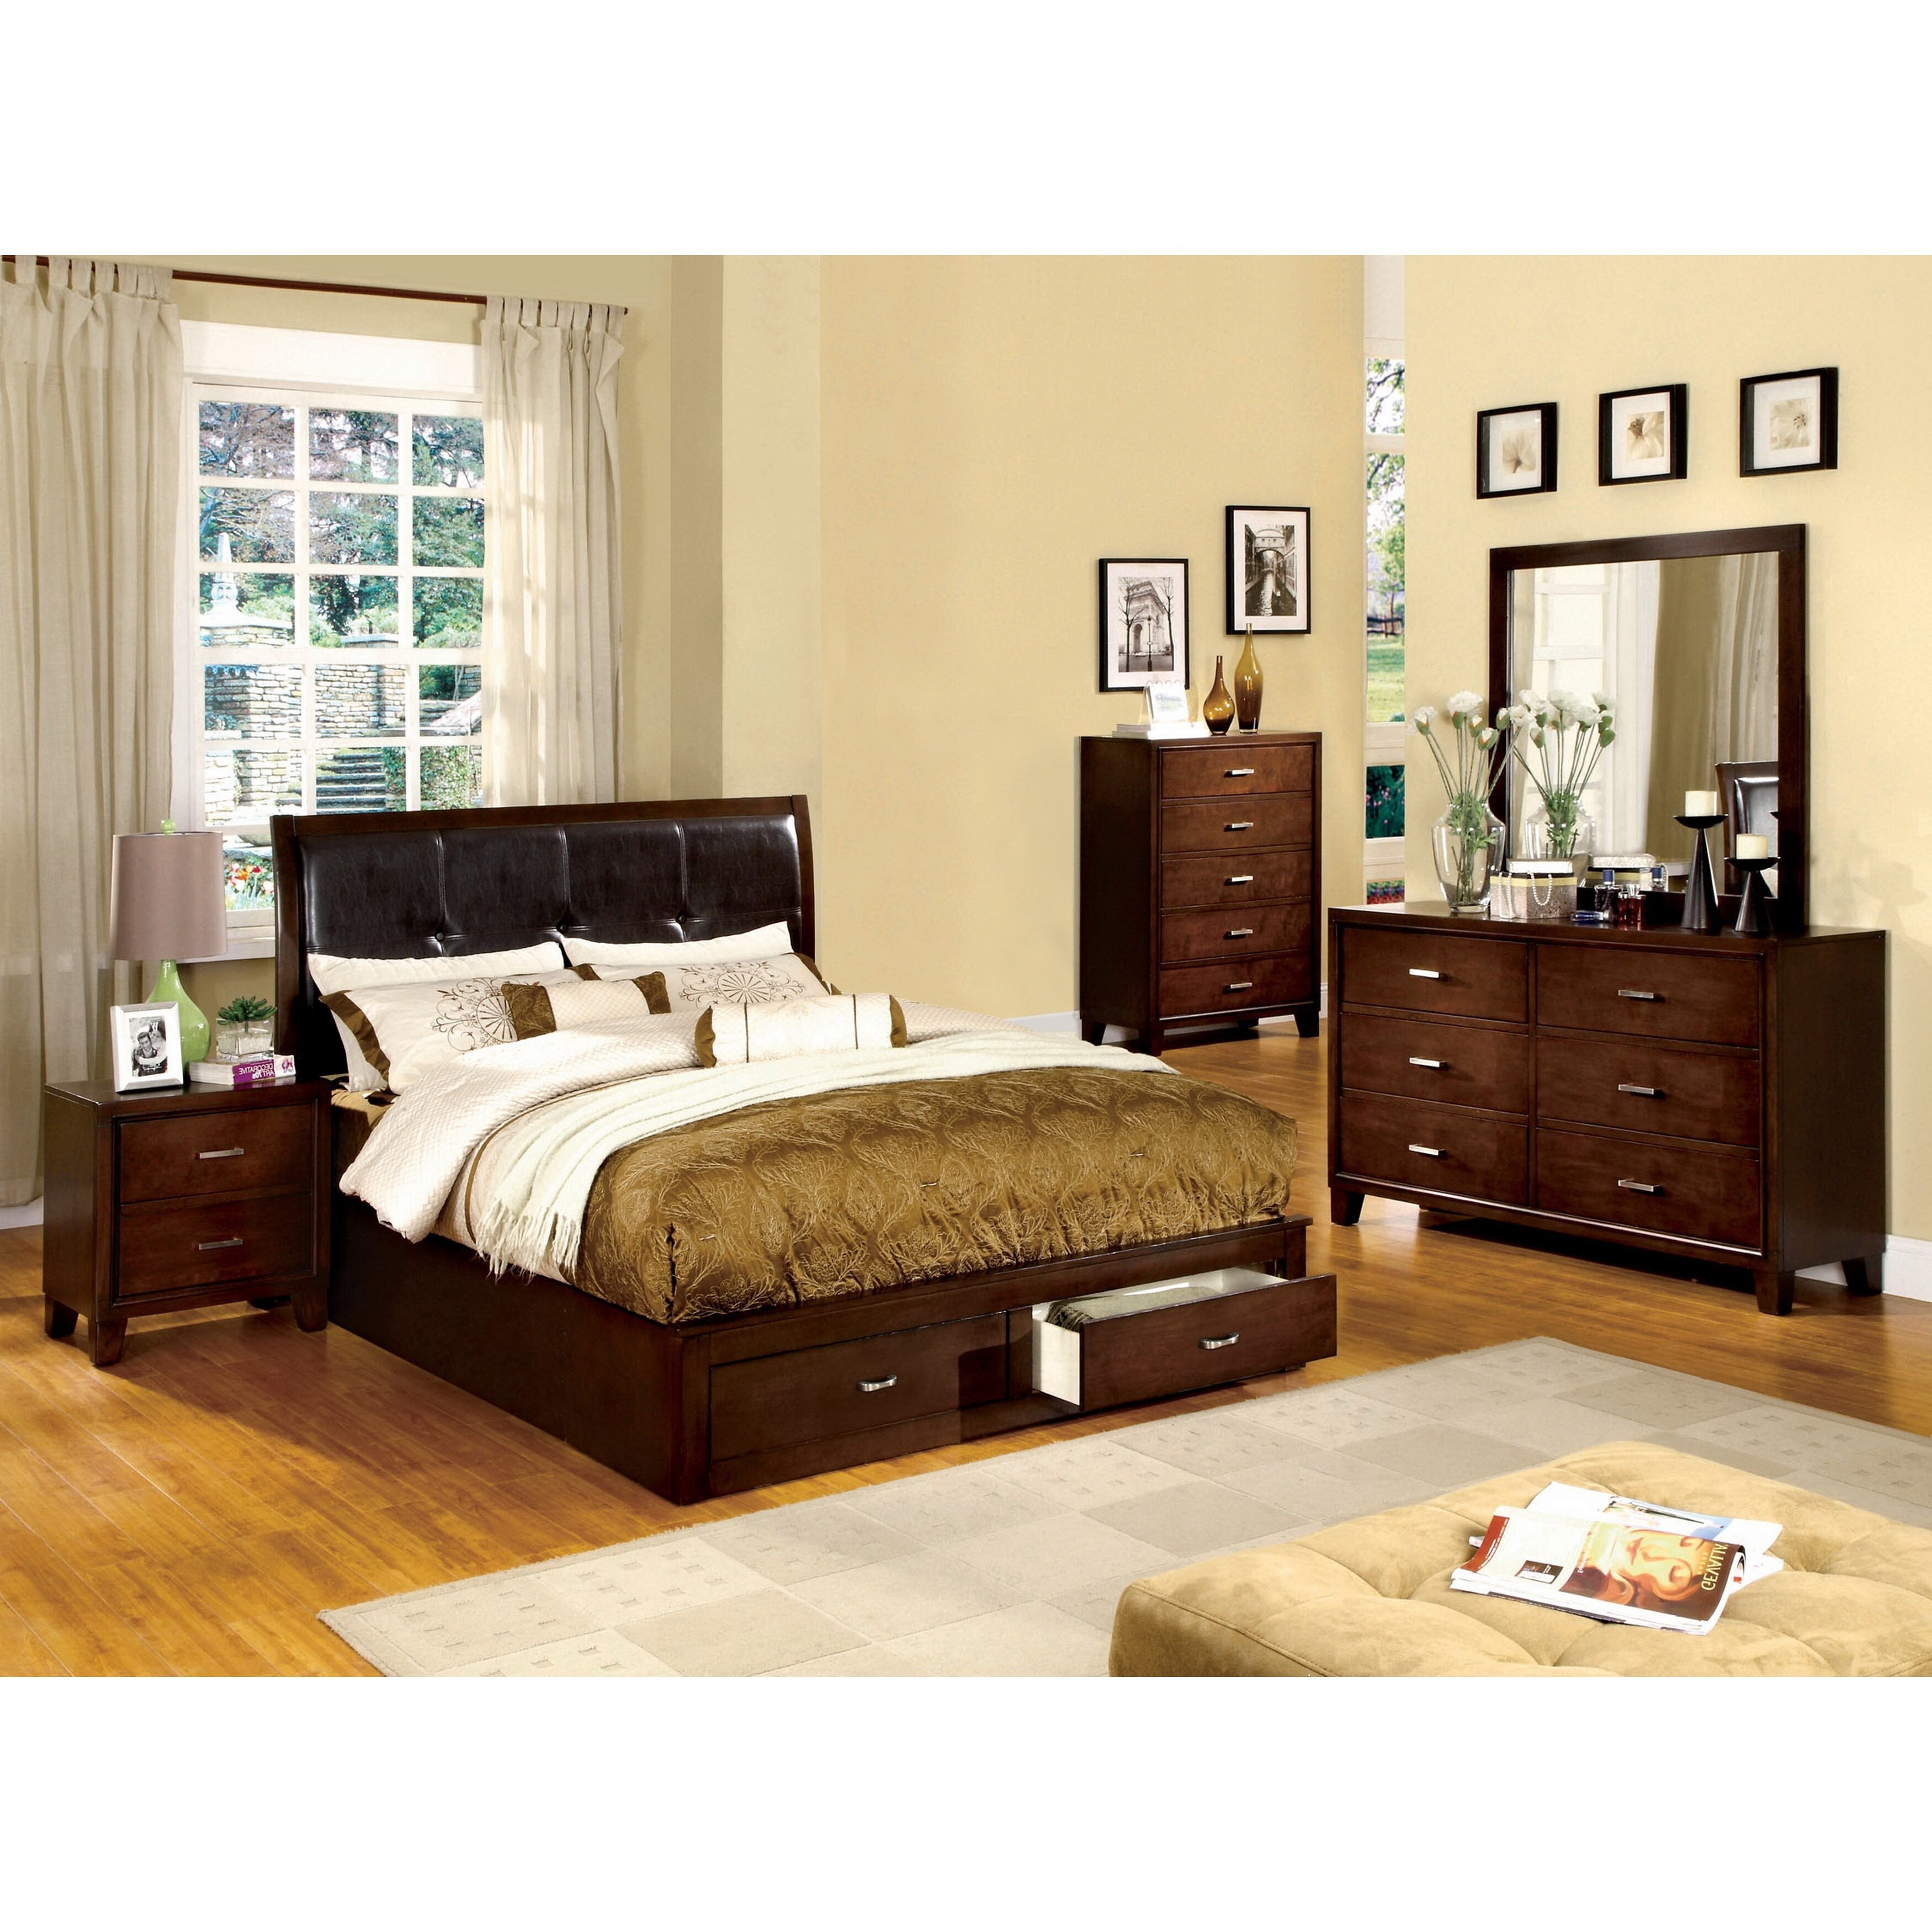 Furniture Of America York Brown Cherry Finish 5 piece Queen size Bed Set (QueenWood finish Brown cherryPlatform bed features a generously padded leatherette headboardButton tuft design on headboard upholsteryBed drawers Two (2) drawers on bed railNights